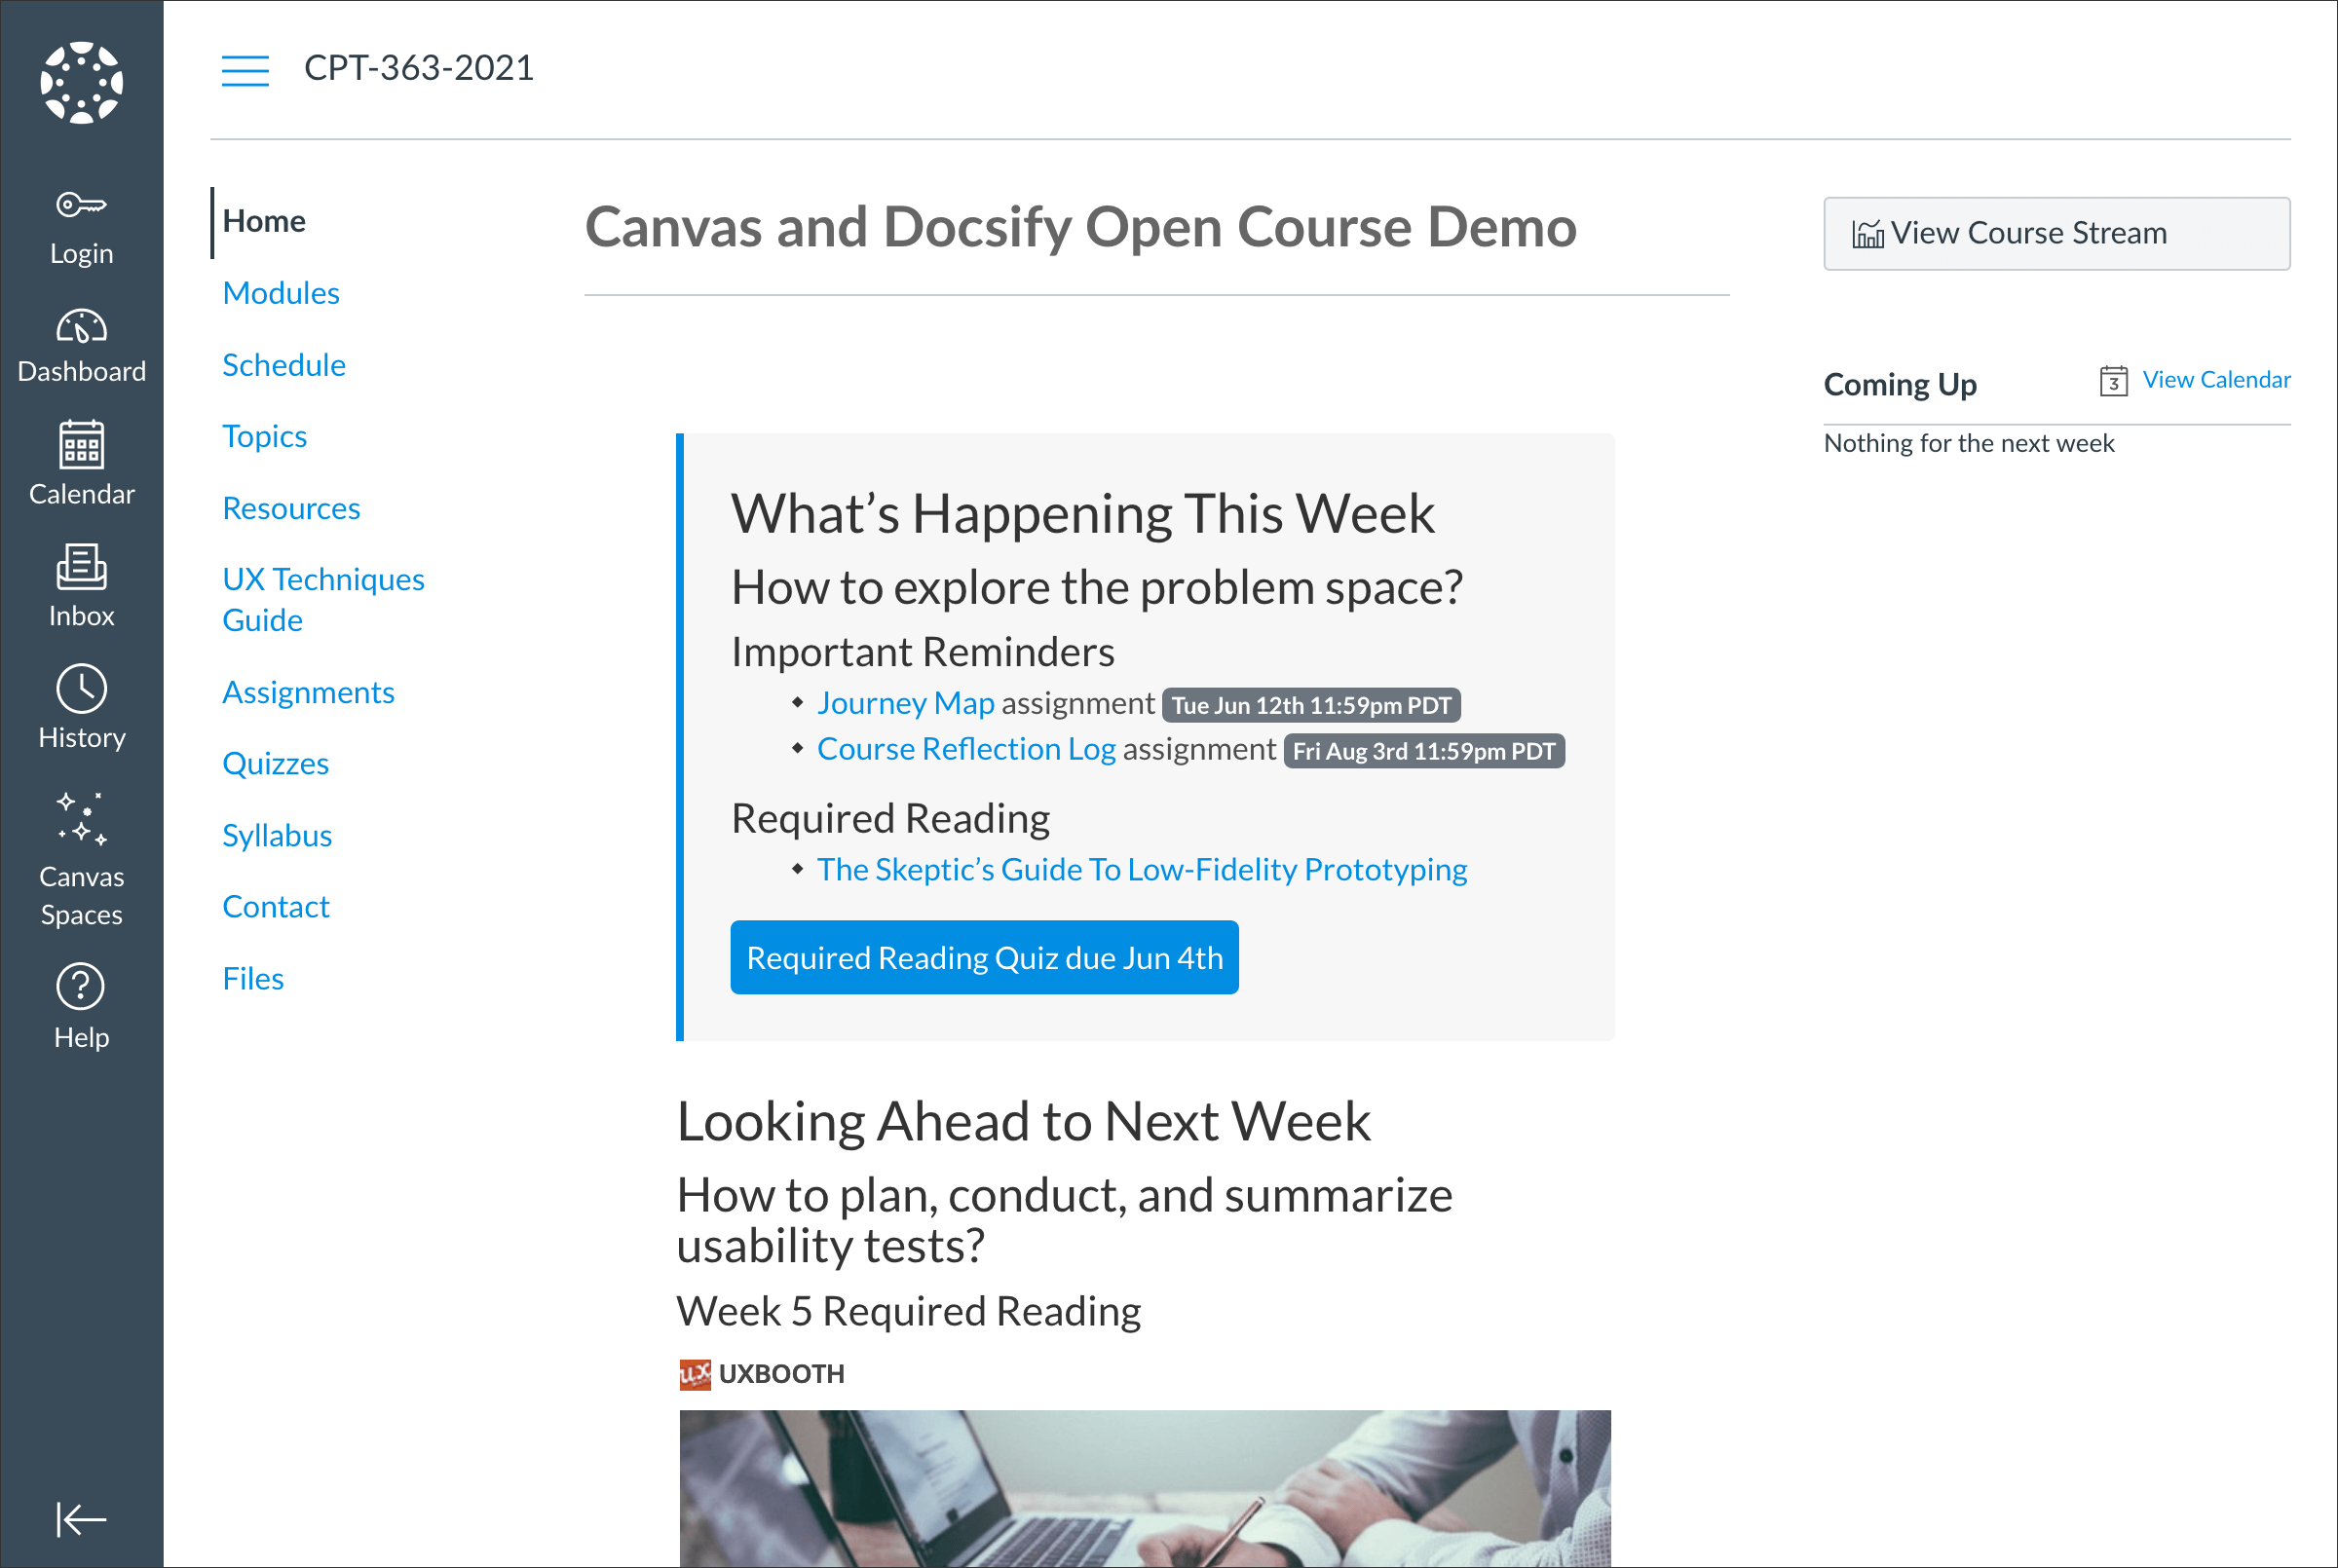  Docsify Open Course Page Embedded into the Canvas LMS